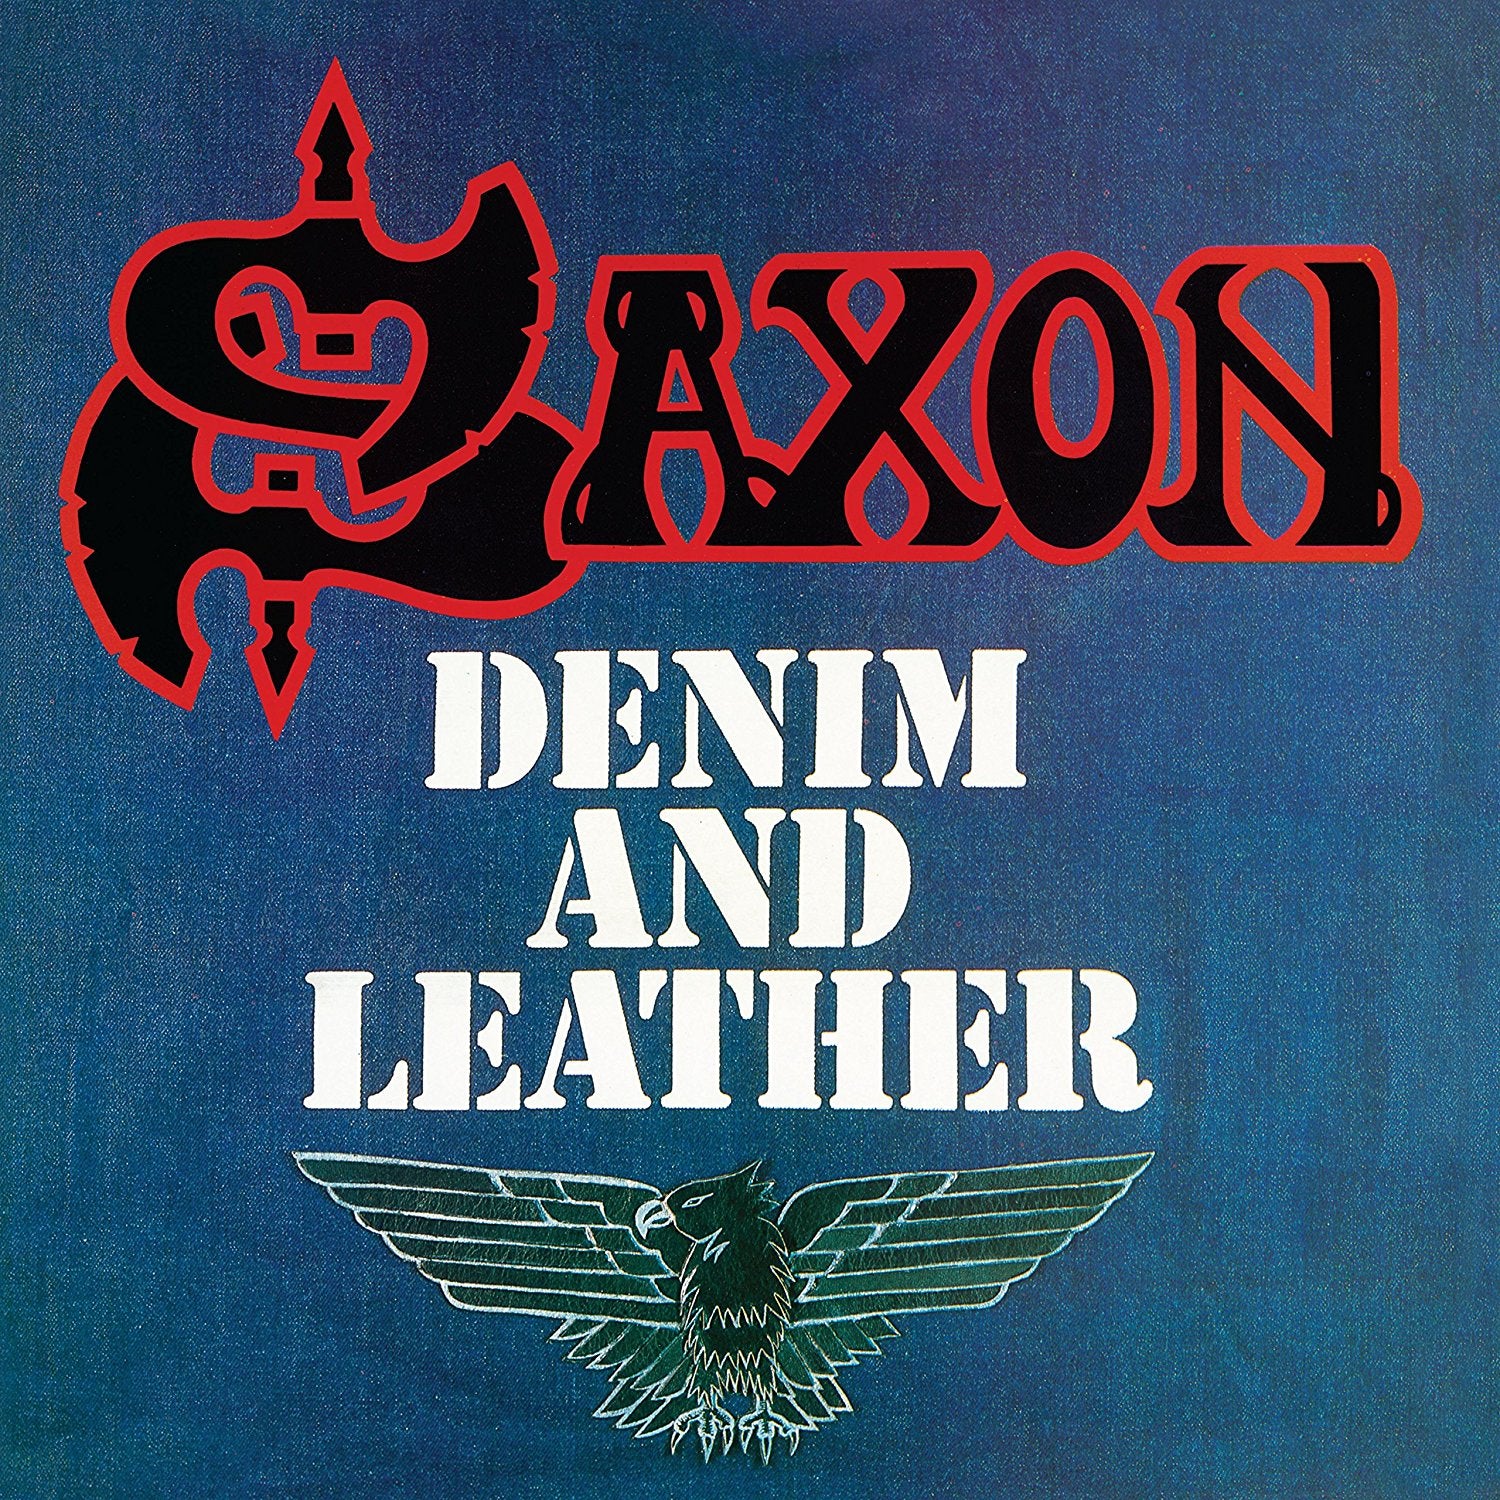 Saxon "Denim And Leather" 24 Page Mediabook CD